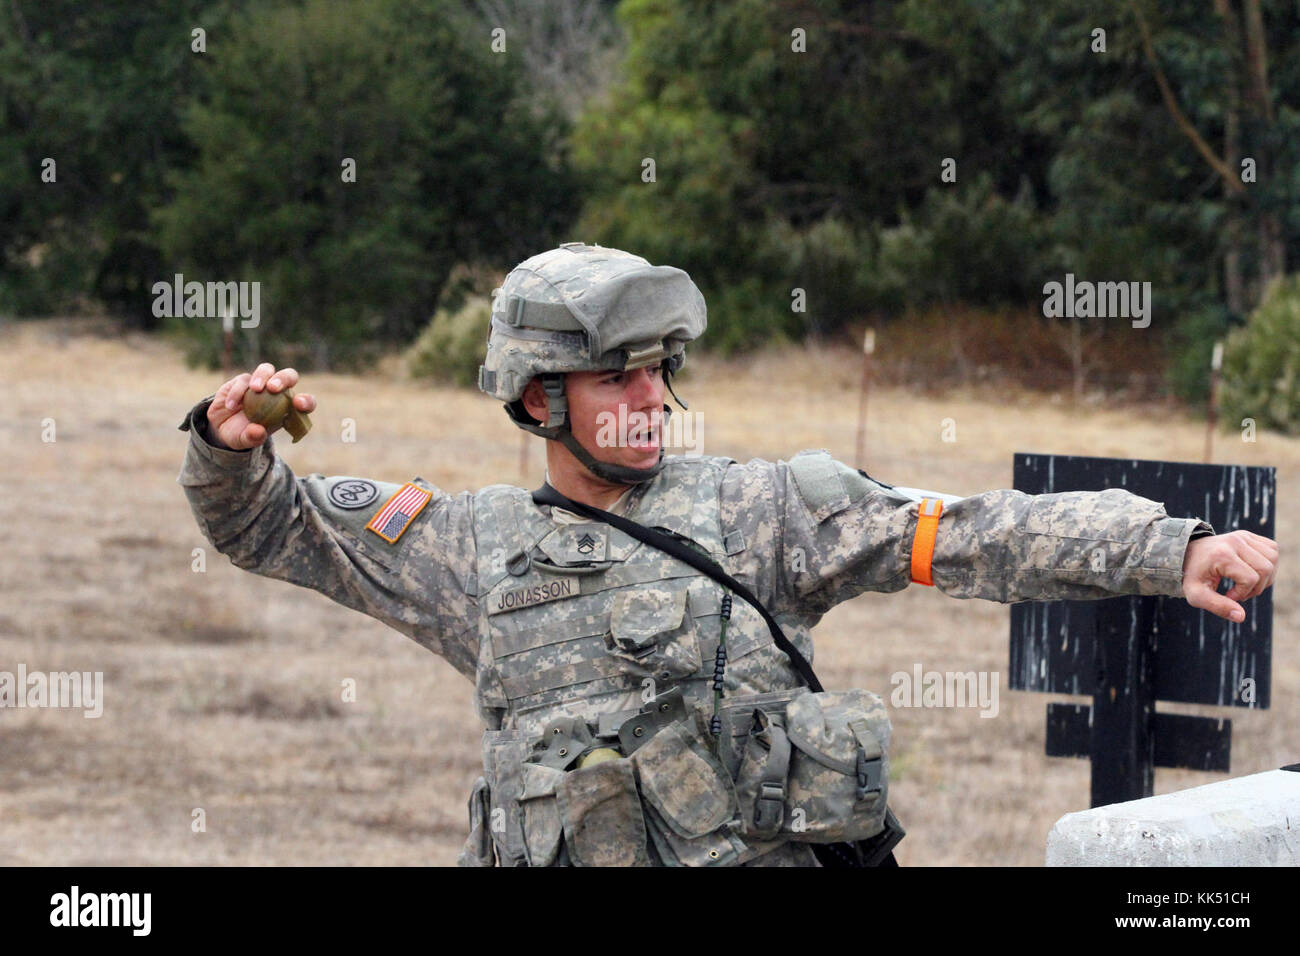 Staff Sgt. Jared Jonasson prepares to throw a grenade simulator Nov. 8 during the California Army National Guard's 2017-18 Best Warrior Competition at Camp San Luis Obispo, California. This was one of the last tests after four competitive days to find California’s Best of the Best. (Army National Guard photo by Staff Sgt. Eddie Siguenza) Stock Photo